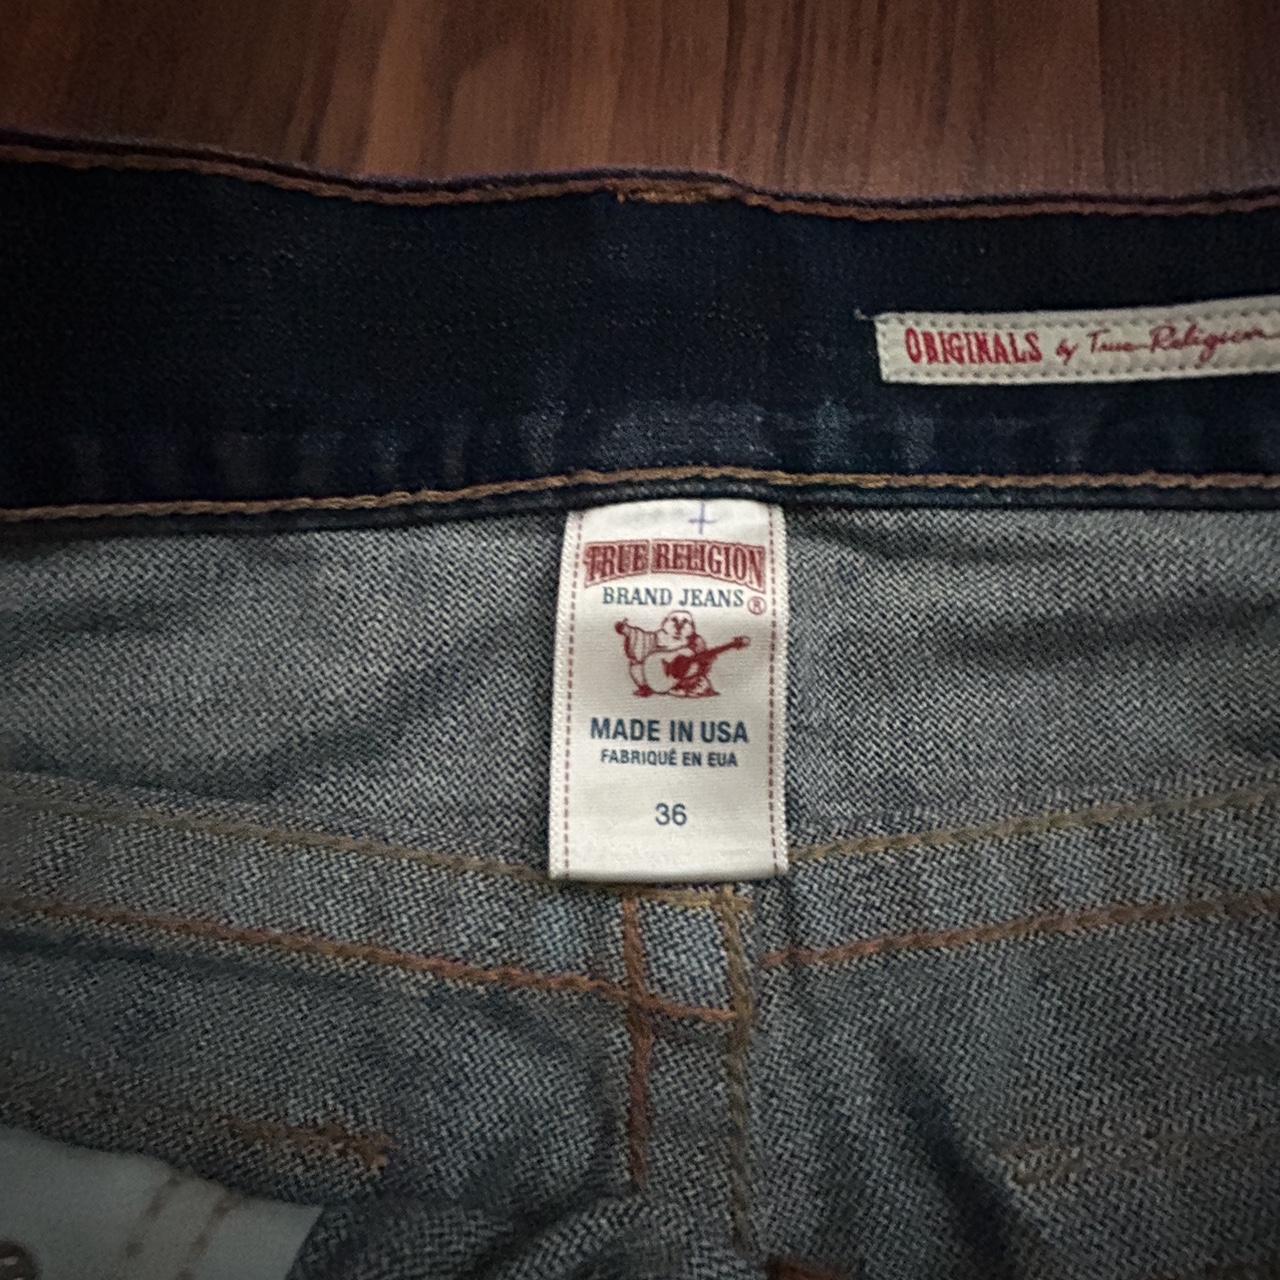 True religion JORTS baggy fit Bought in nyc Made in... - Depop